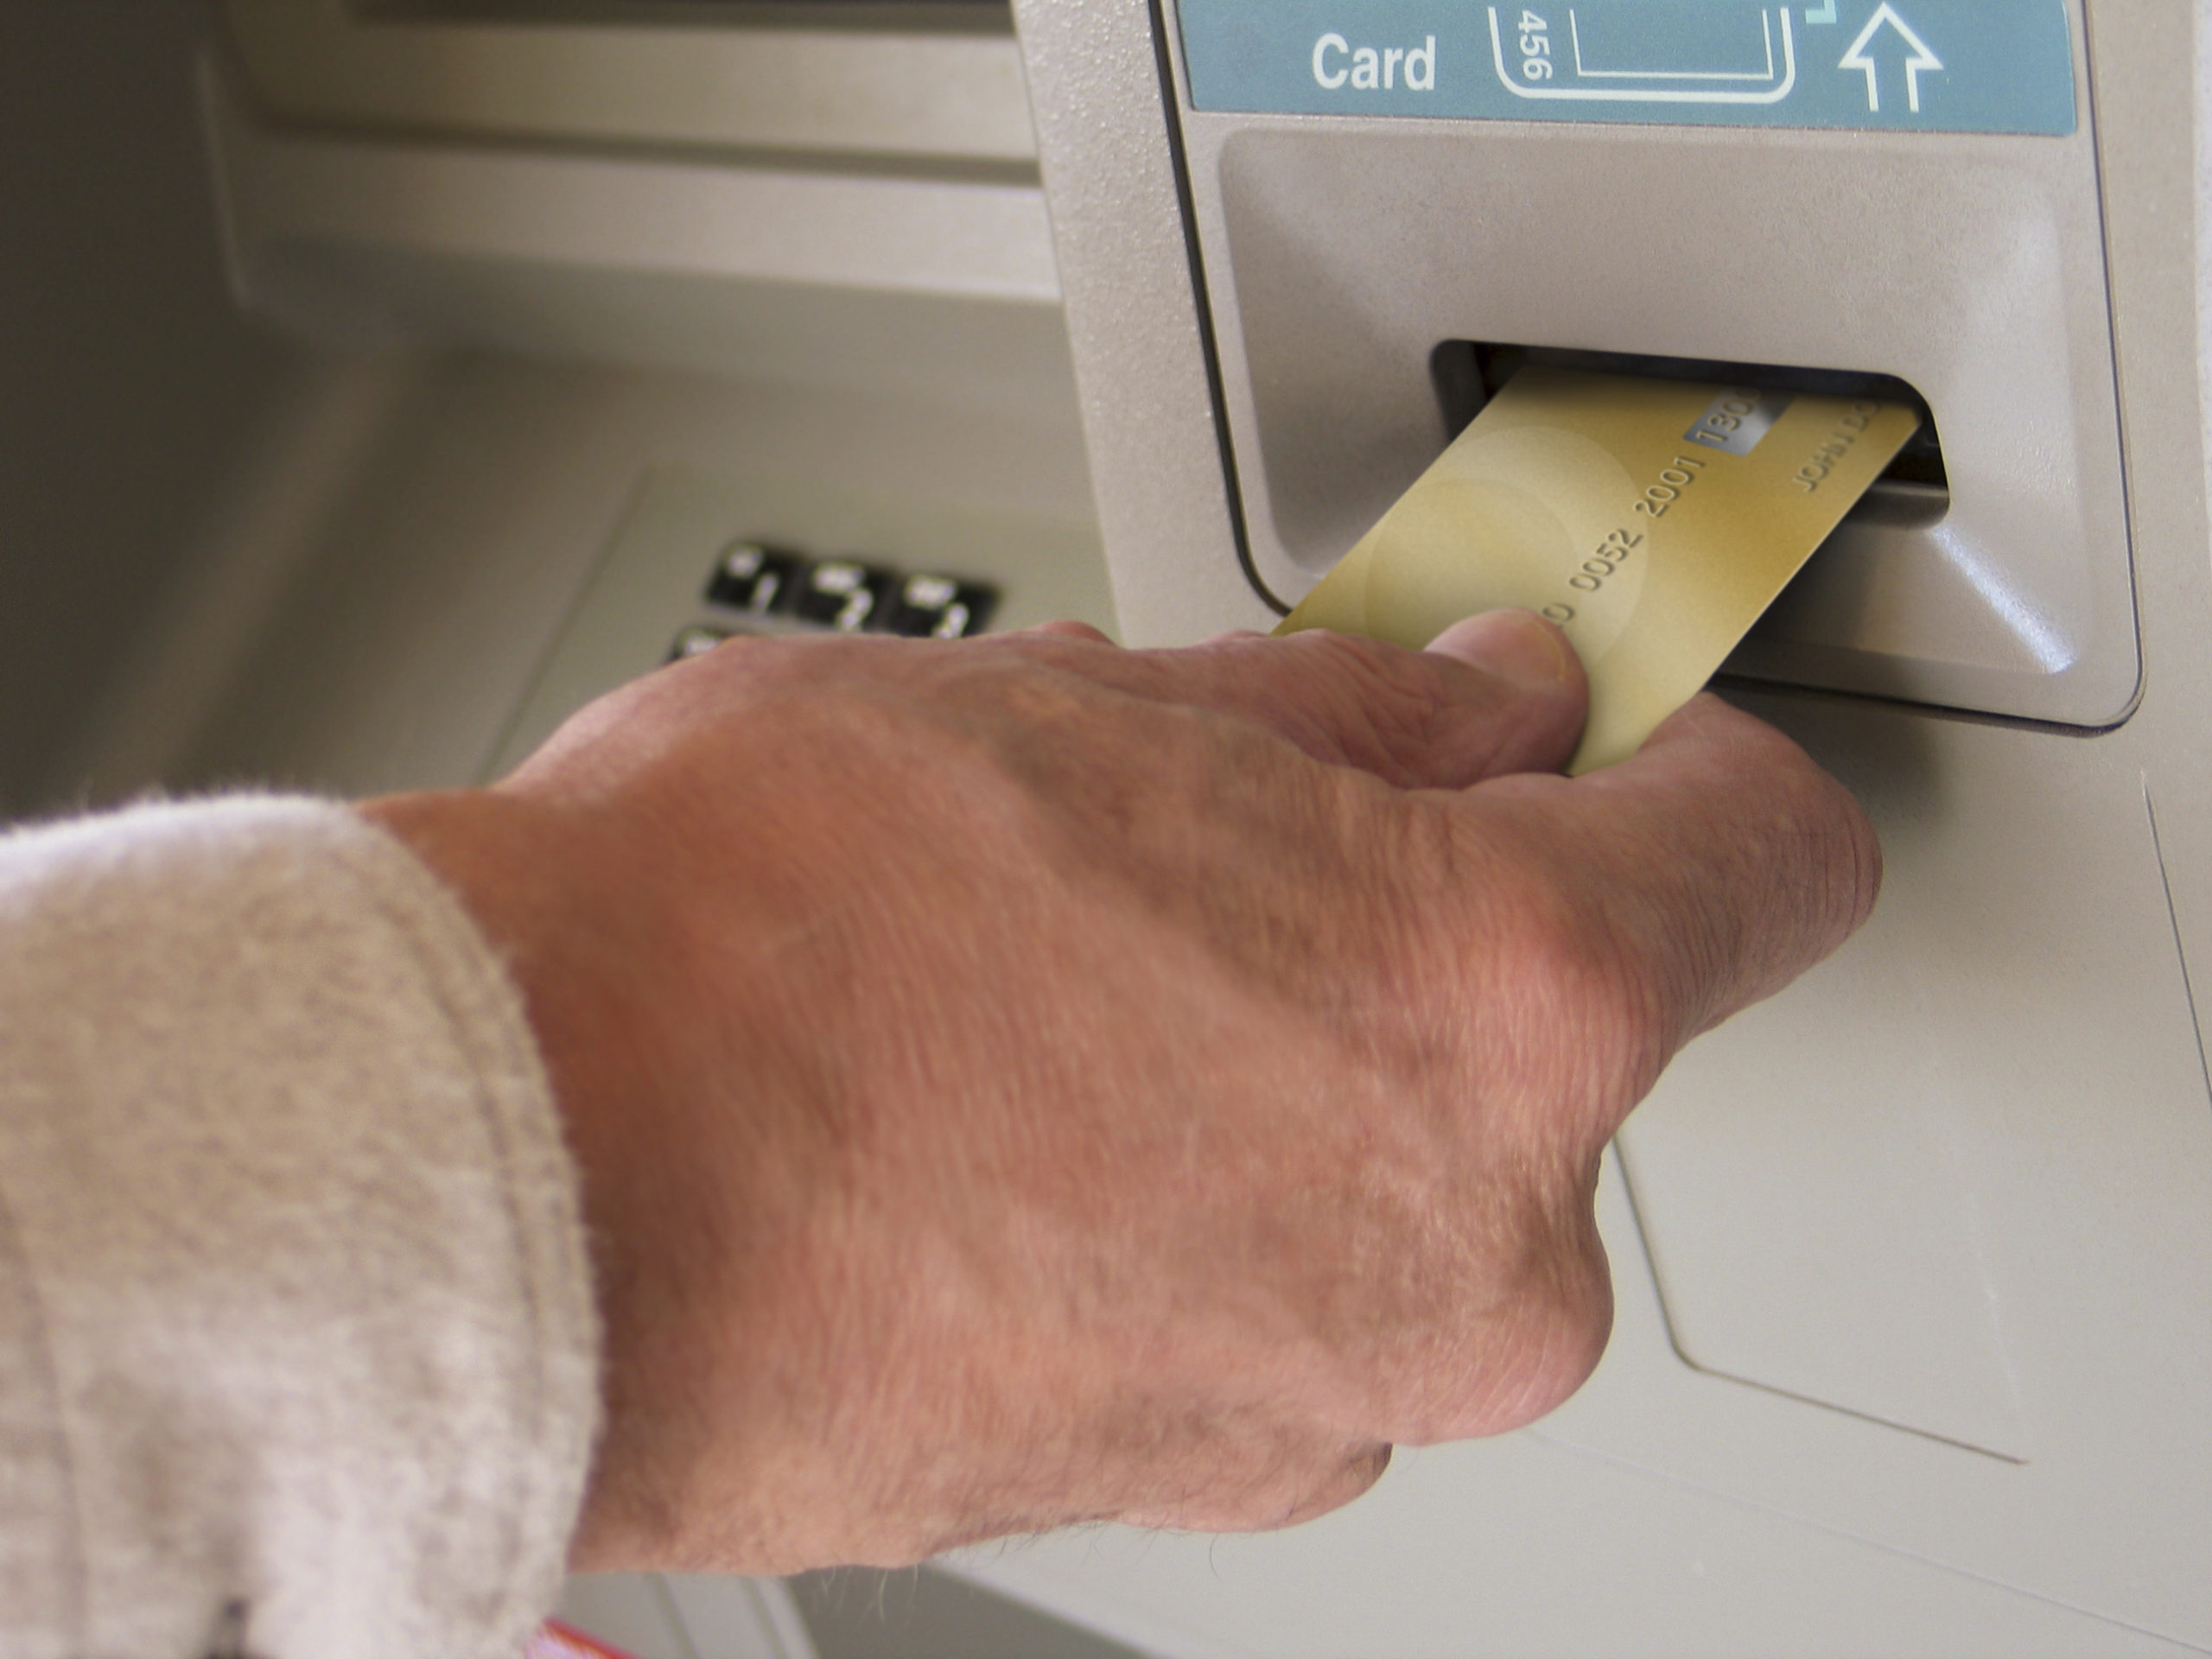 inserting card into ATM